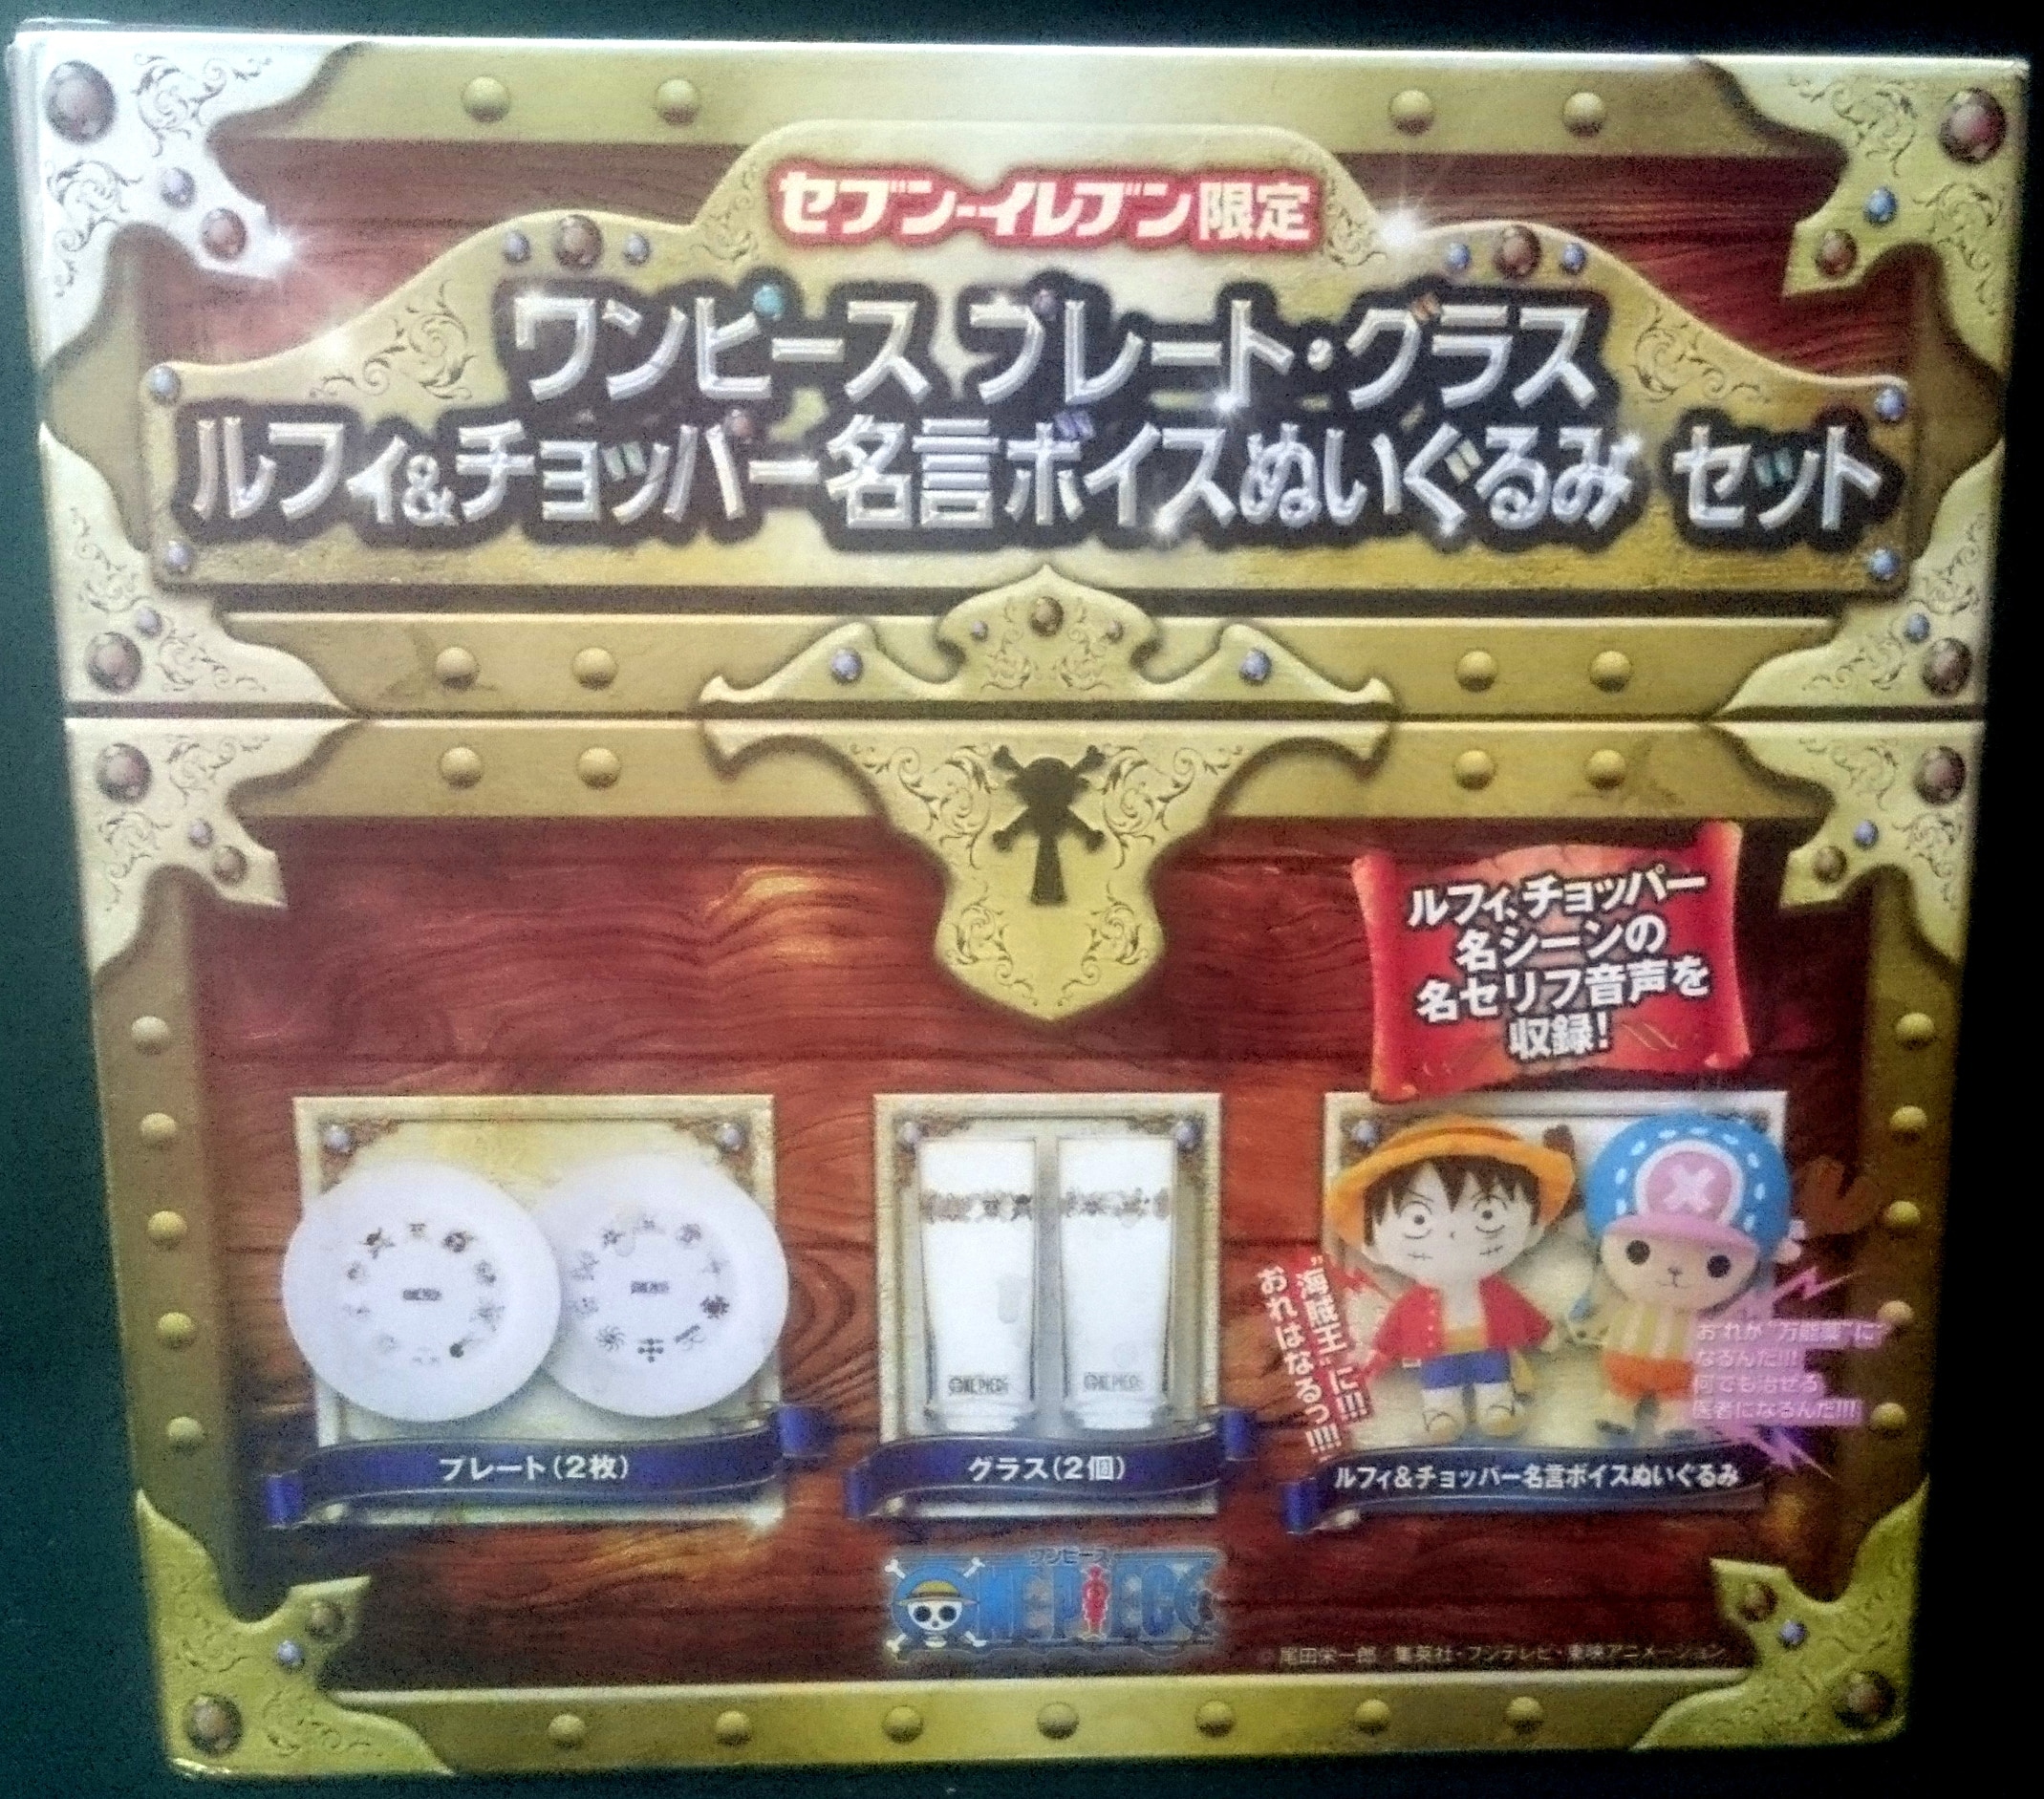 7 Eleven One Piece 7 Eleven Limited Edition Plate Glass Luffy And Chopper Quotations Voice Plush Stuffed Toy Set Mandarake Online Shop